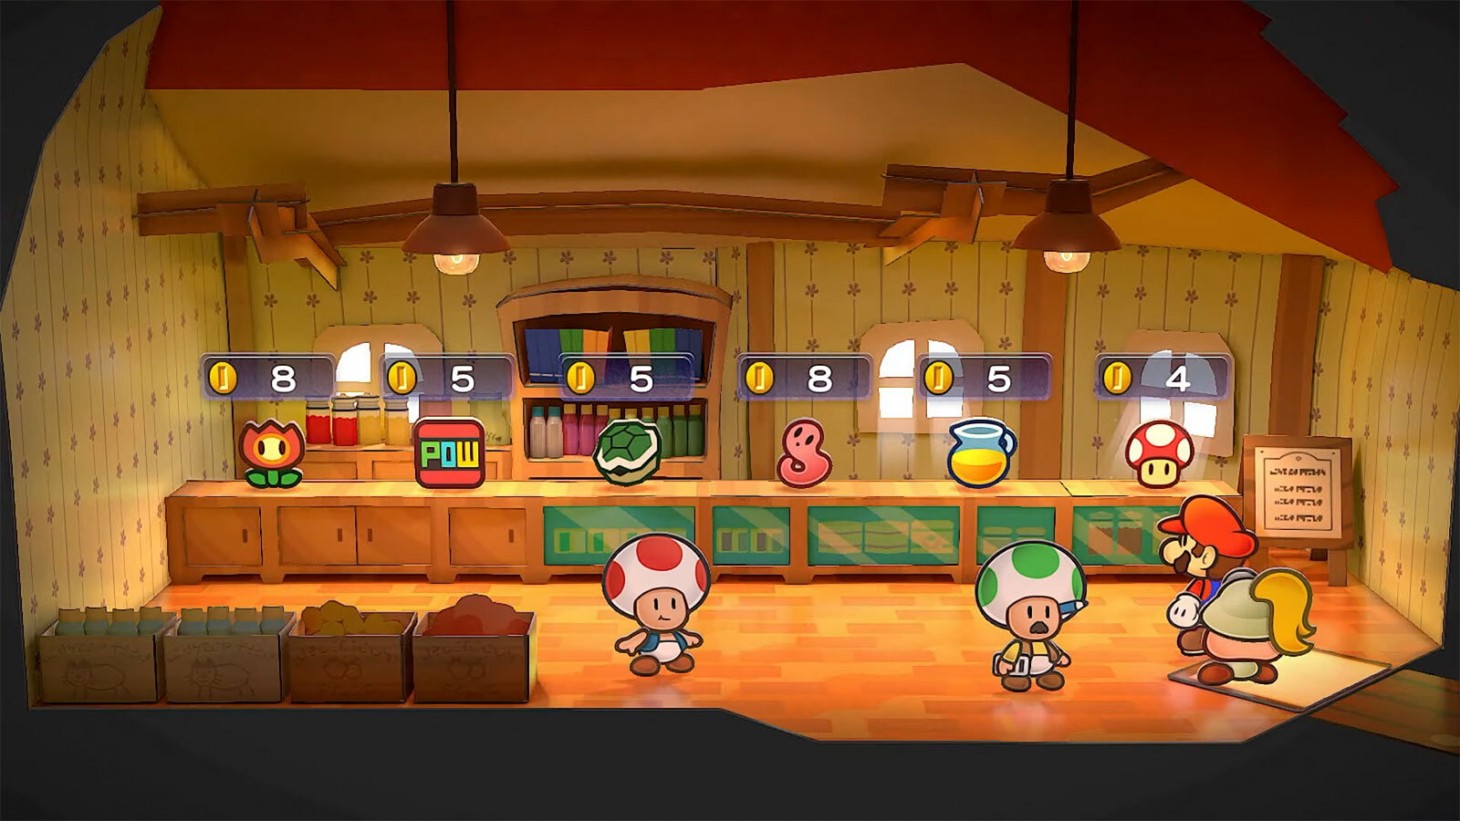 Paper Mario: The Thousand-Year Door Is Coming To Nintendo Switch